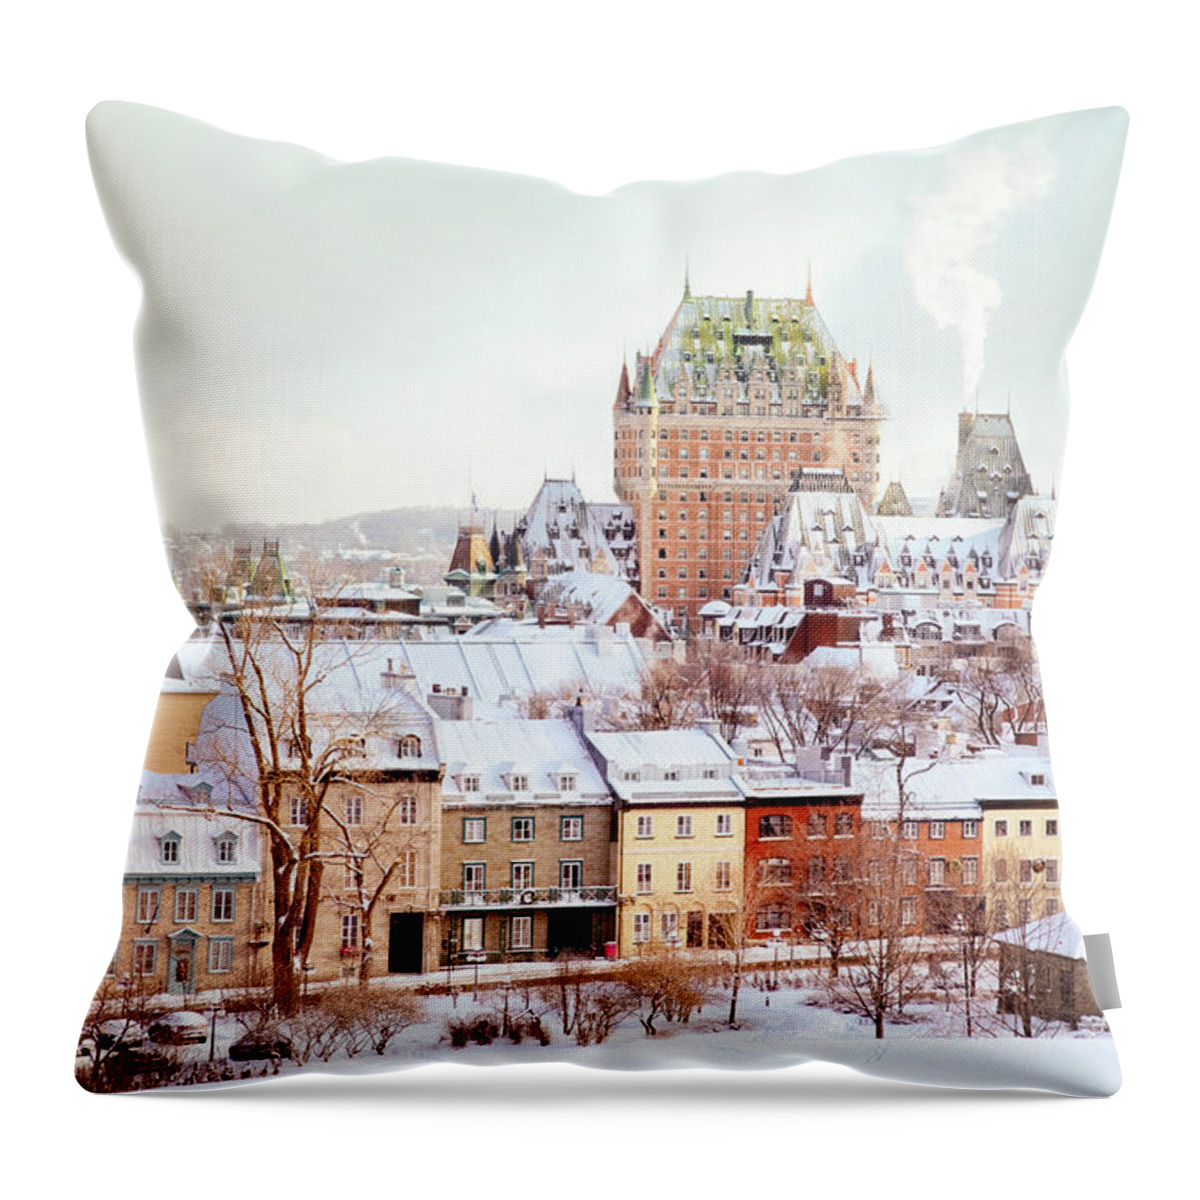 Snow Throw Pillow featuring the photograph Quebec City Winter Skyline With Chateau by Nicolasmccomber